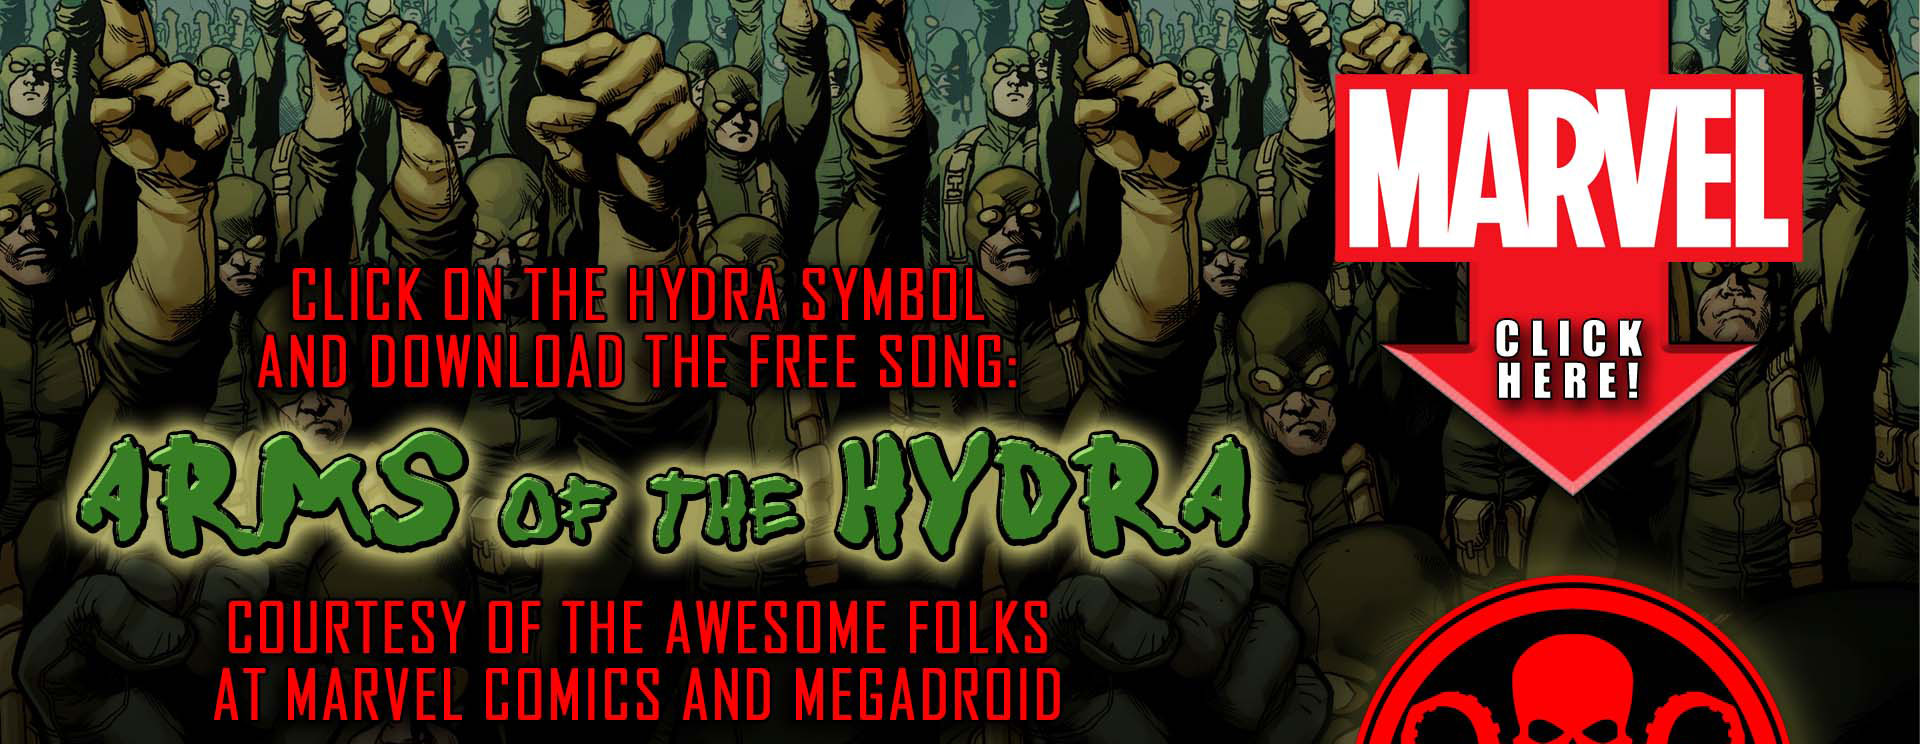 HYDRA-DL-PAGE-FLAT_Slices_01